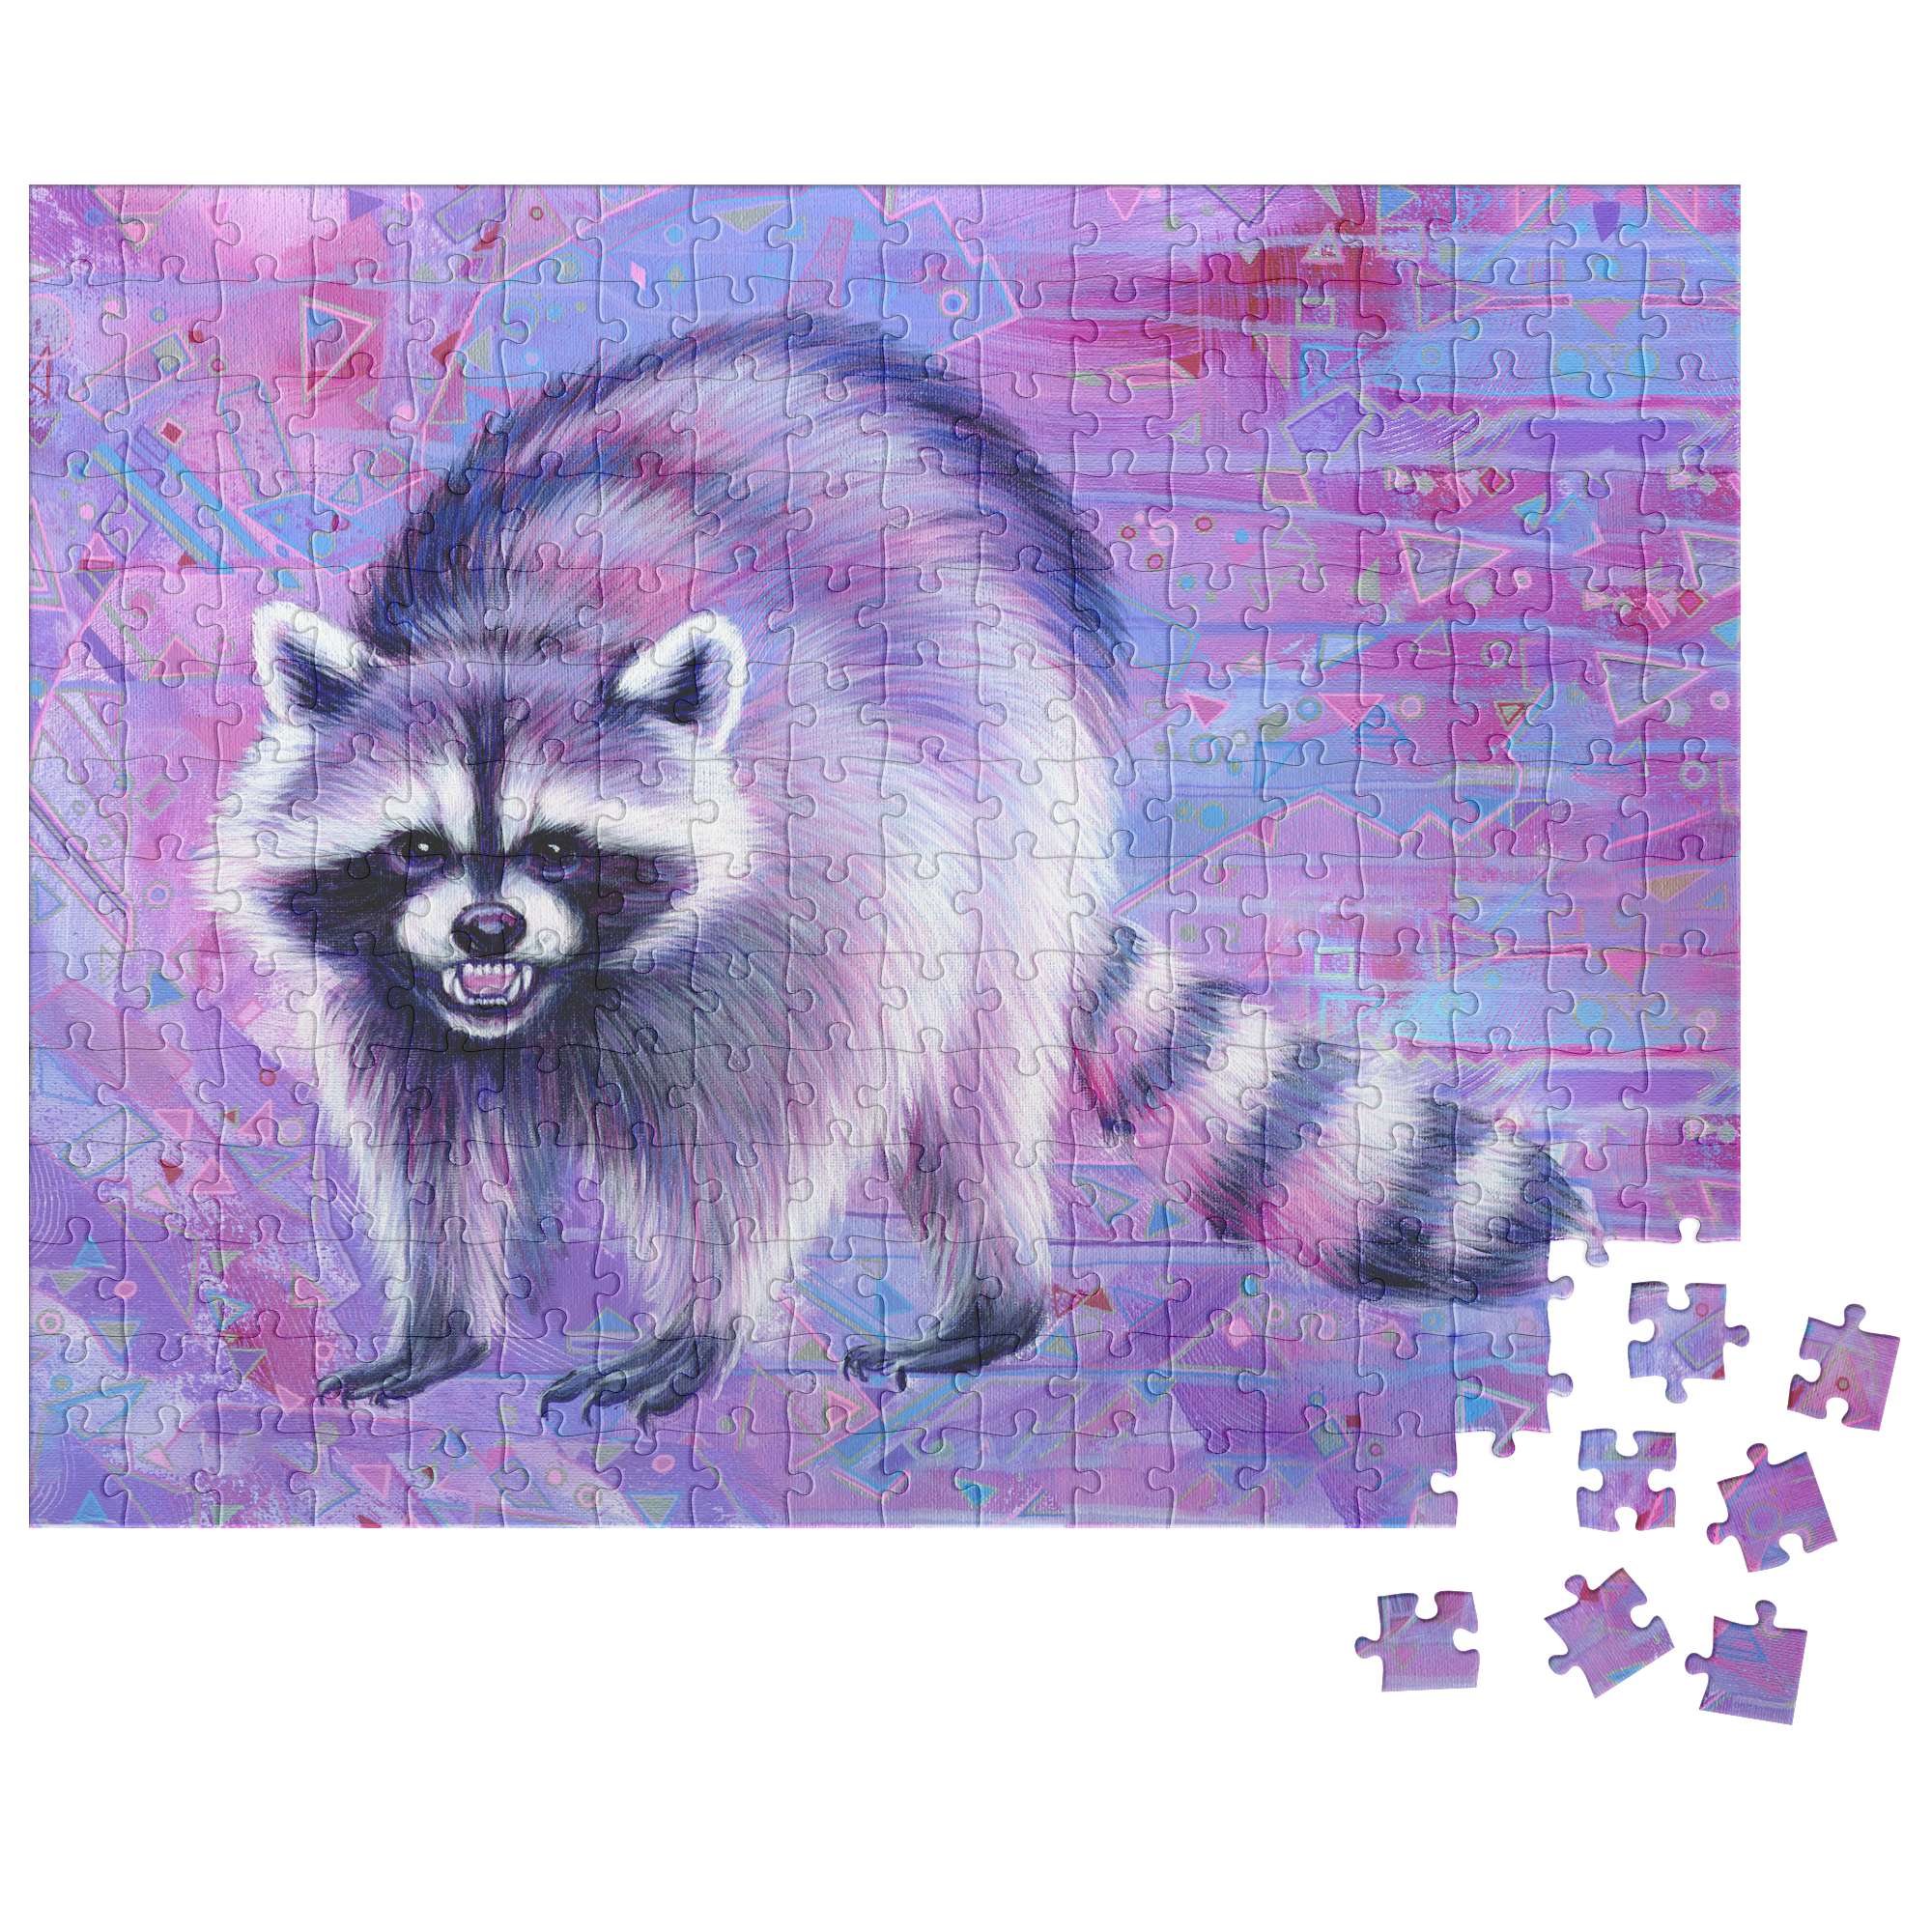 A Raccoon Puzzle, mostly completed, with a few pieces detached on the side.